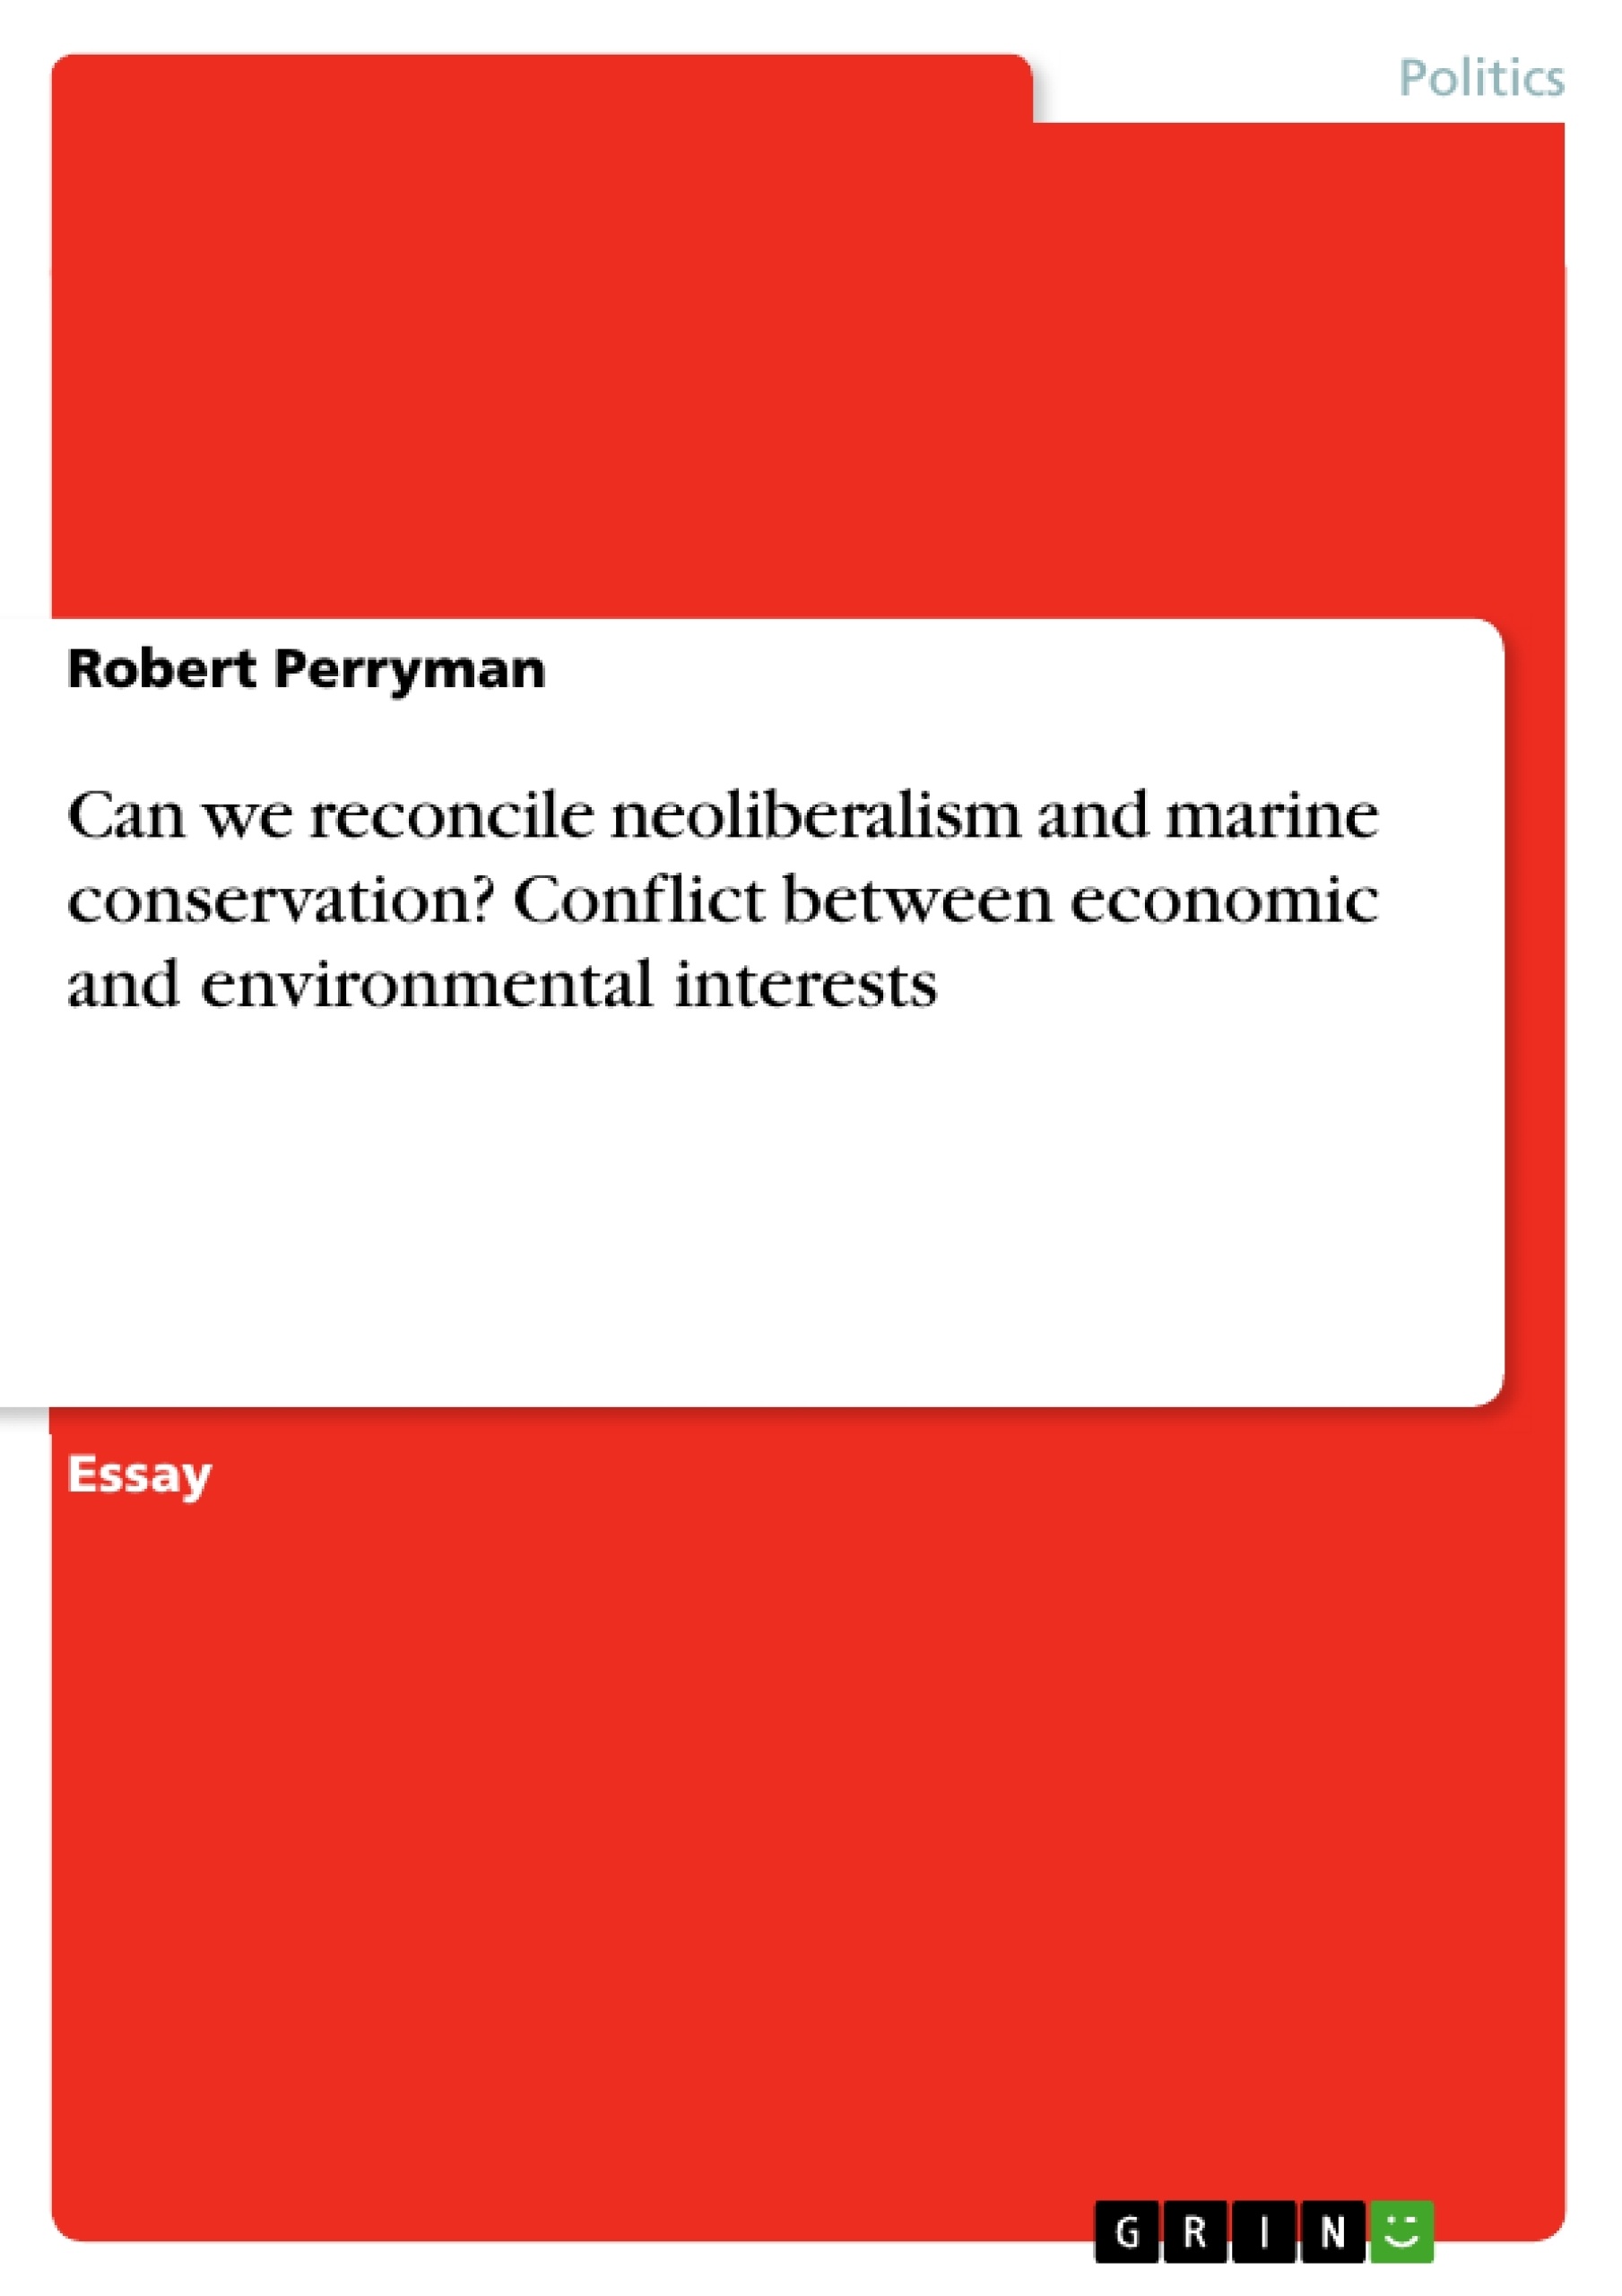 Title: Can we reconcile neoliberalism and marine conservation? Conflict between economic and environmental interests